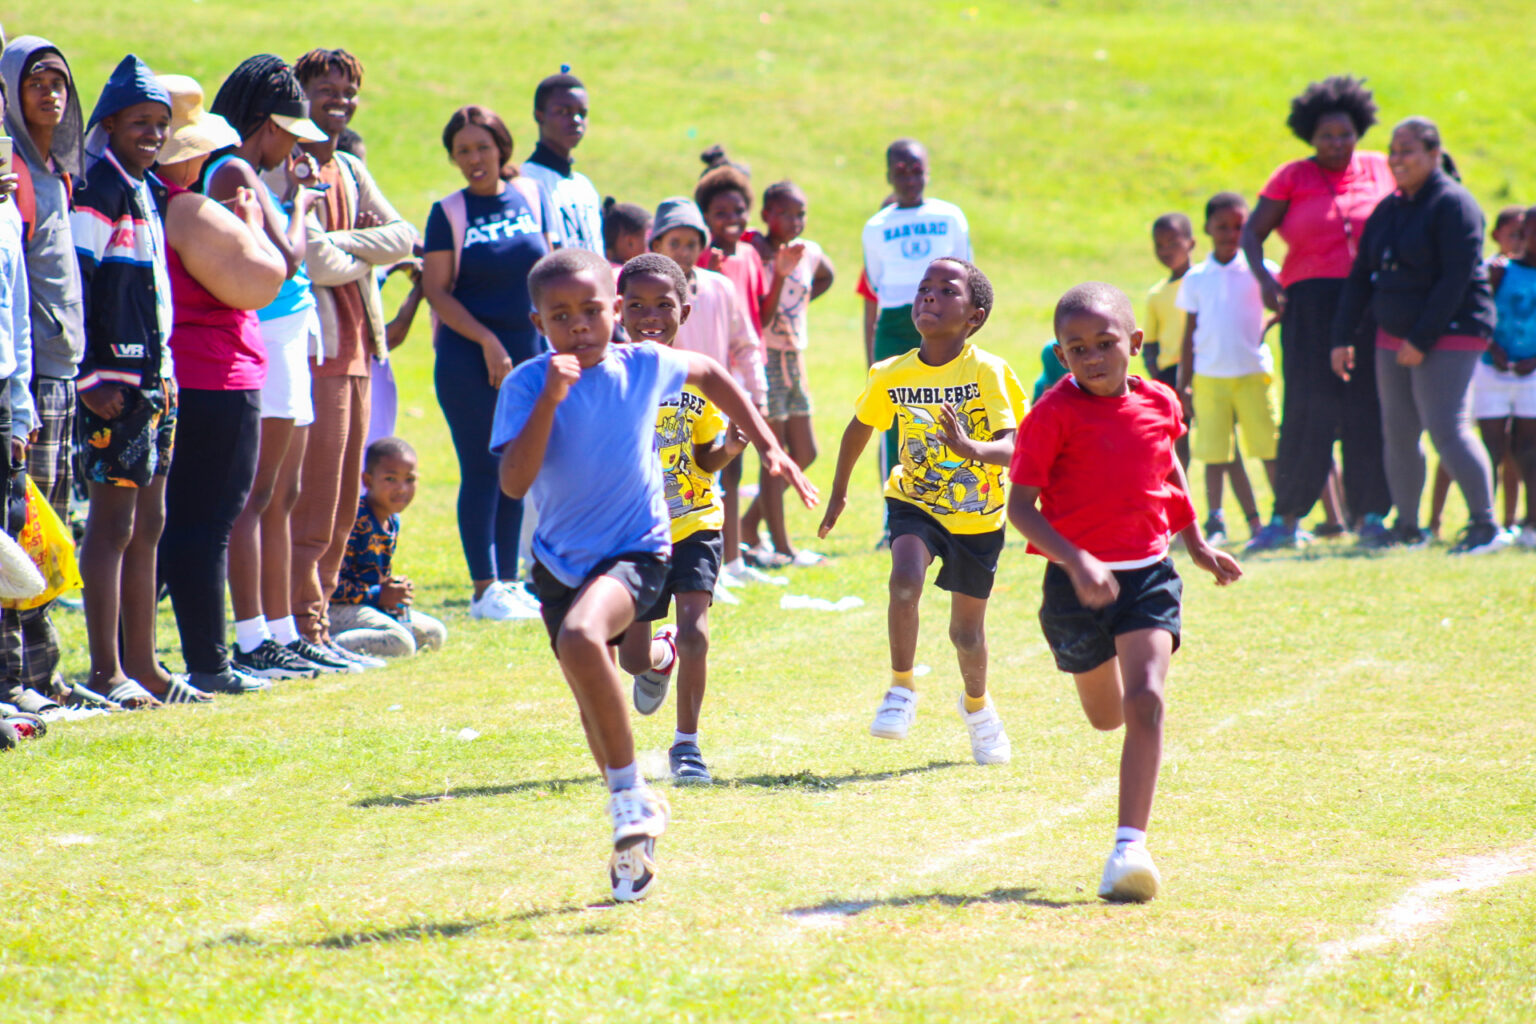 George Dickerson Primary school foundation phase pupils participating in the inter-house sports day. Photo by Kivitts Media